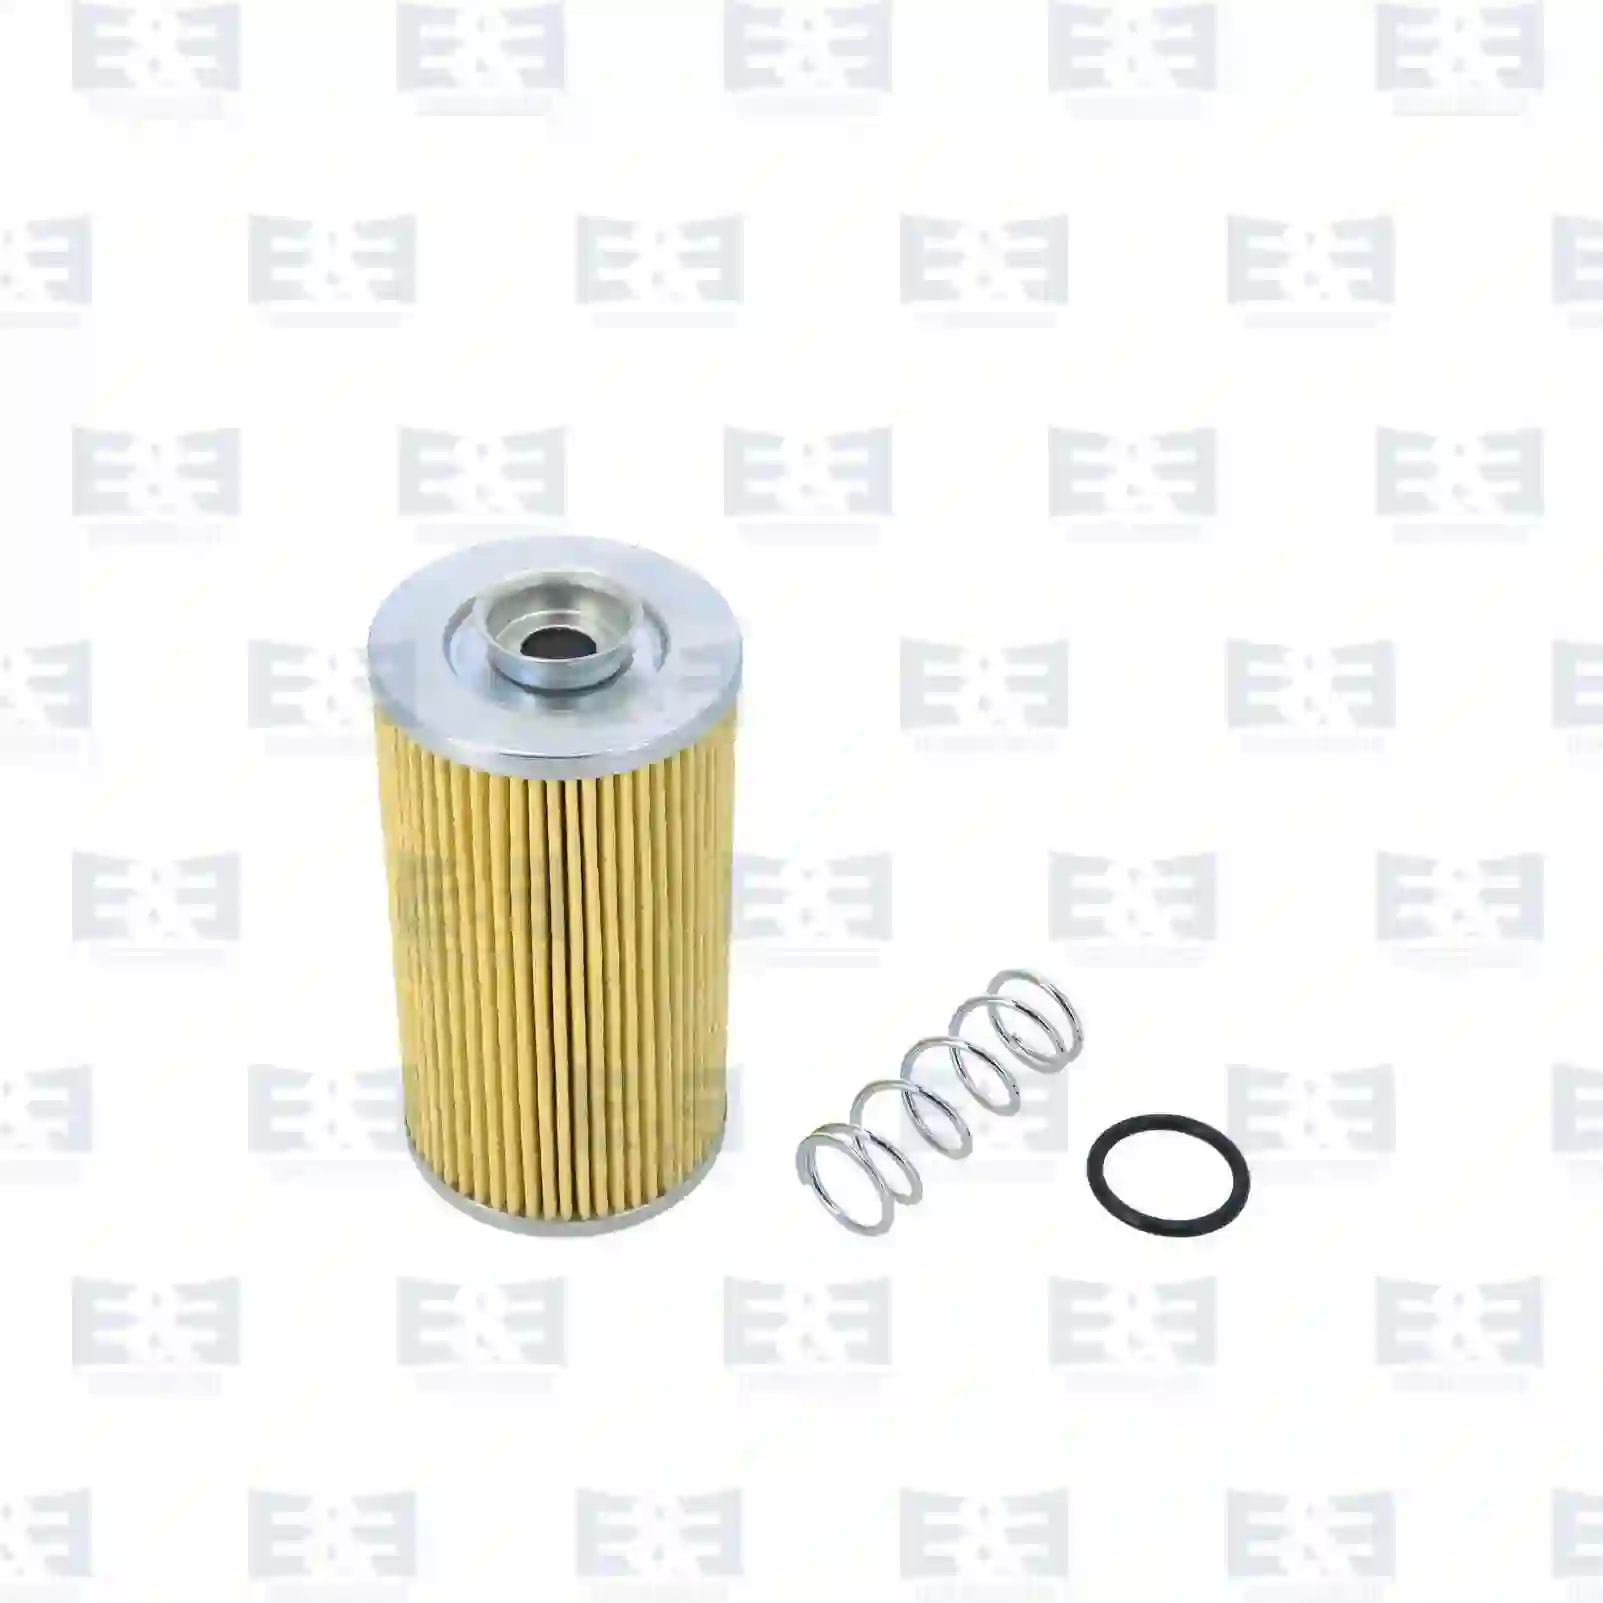 Oil Container, Steering Oil filter insert, EE No 2E2205512 ,  oem no:510614308, 81066680006, 81066680007, N1011005885, 1354074, 0000000833, 0120432180, 0132023000, ZG03046-0008 E&E Truck Spare Parts | Truck Spare Parts, Auotomotive Spare Parts